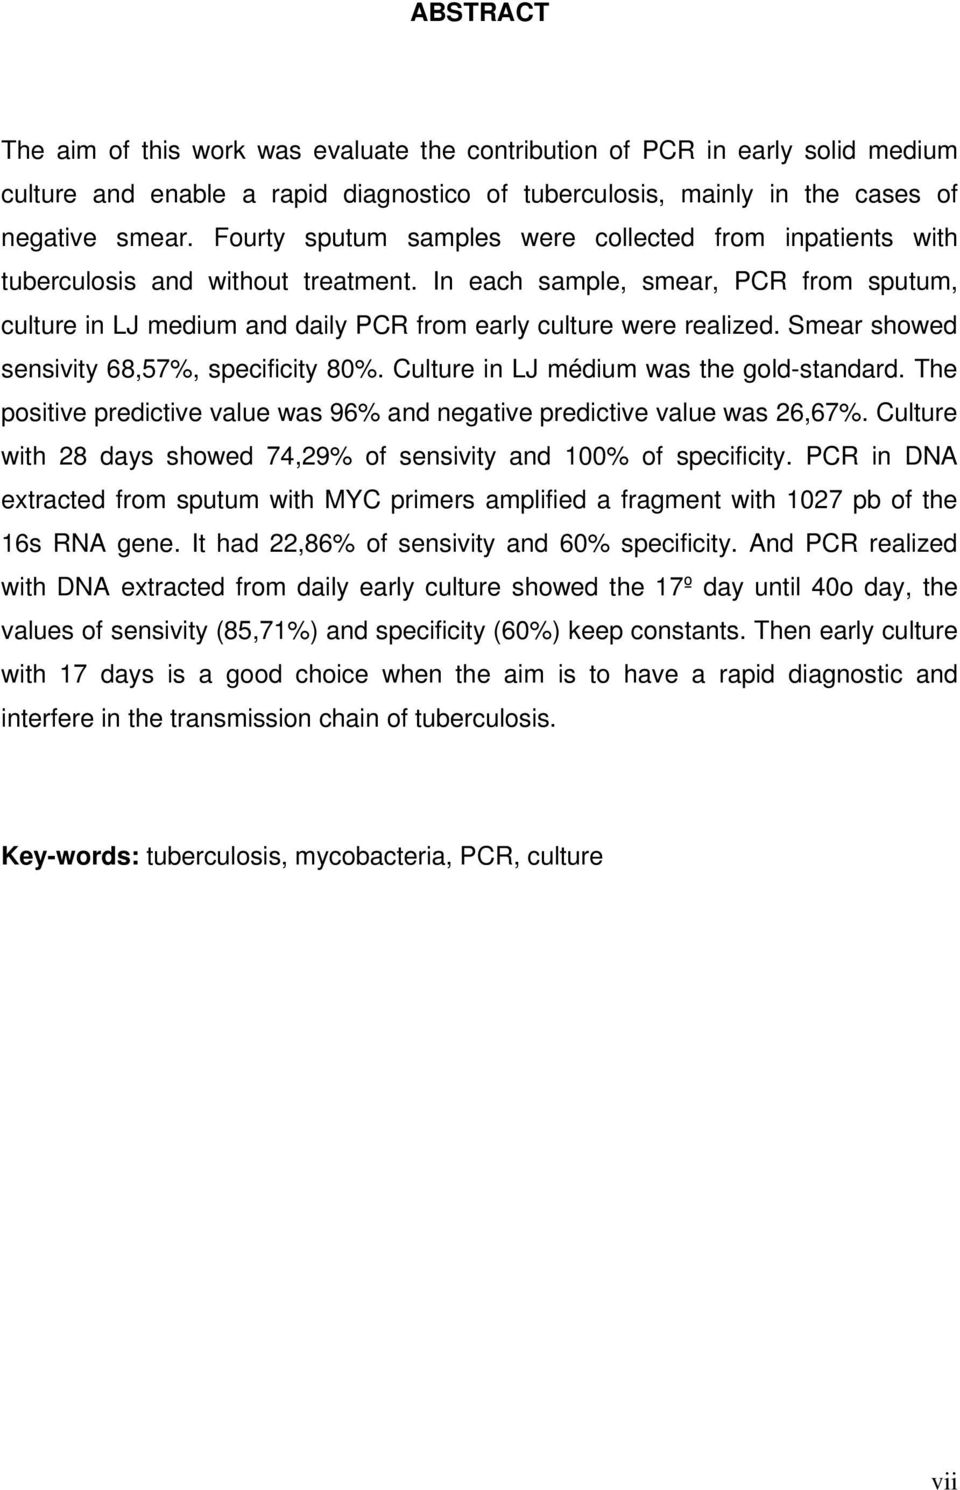 In each sample, smear, PCR from sputum, culture in LJ medium and daily PCR from early culture were realized. Smear showed sensivity 68,57%, specificity 80%. Culture in LJ médium was the gold-standard.